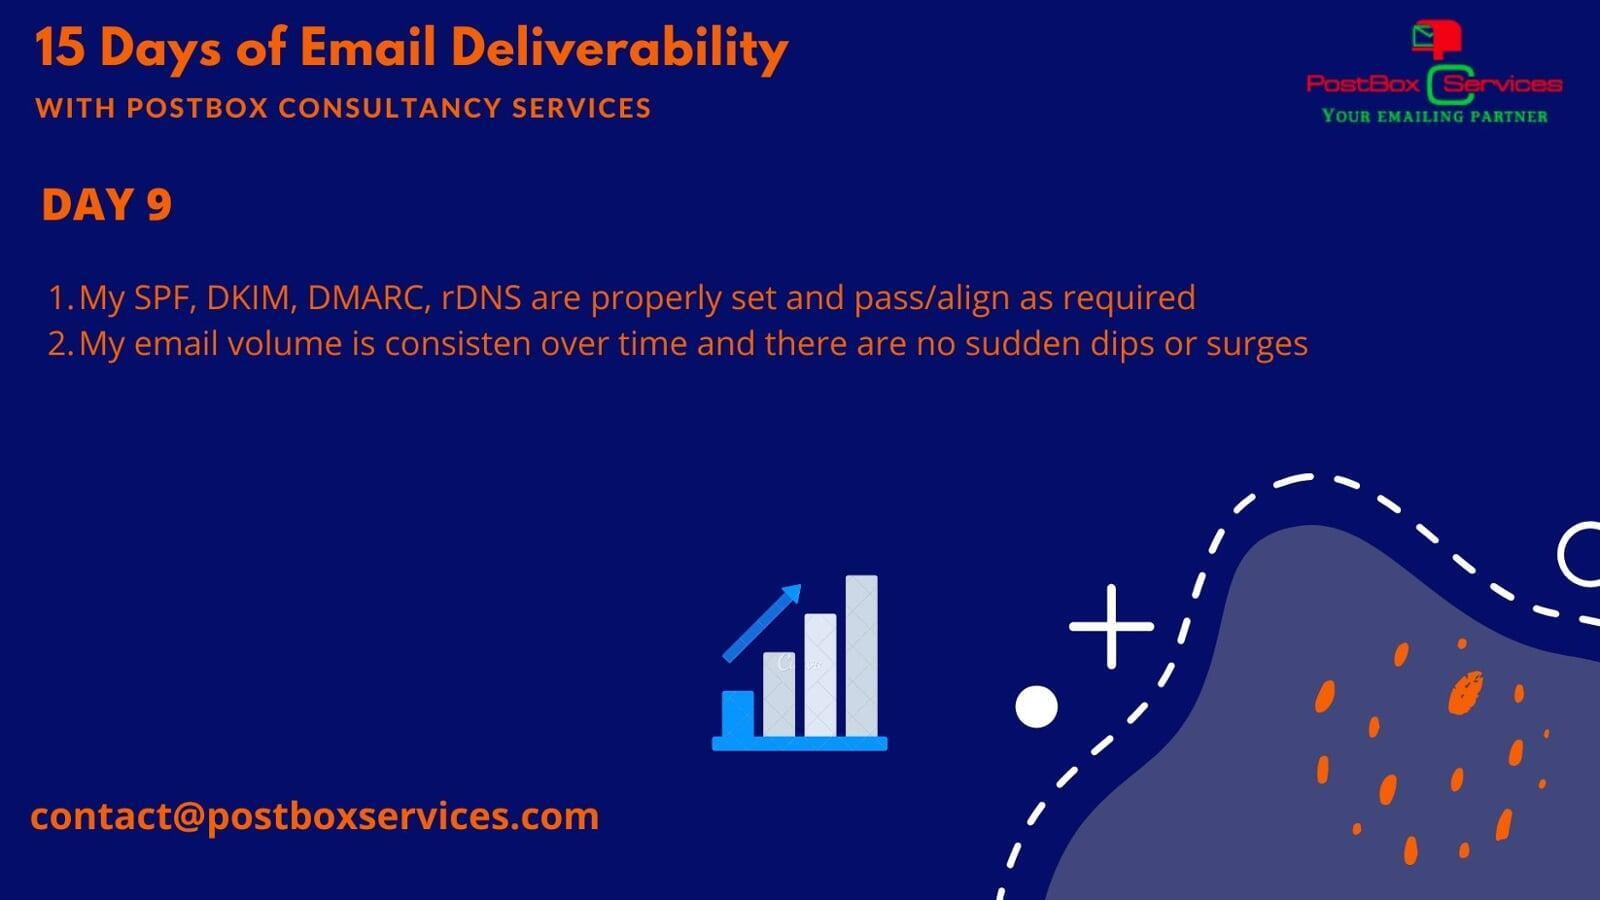 Day 9 Email Deliverability